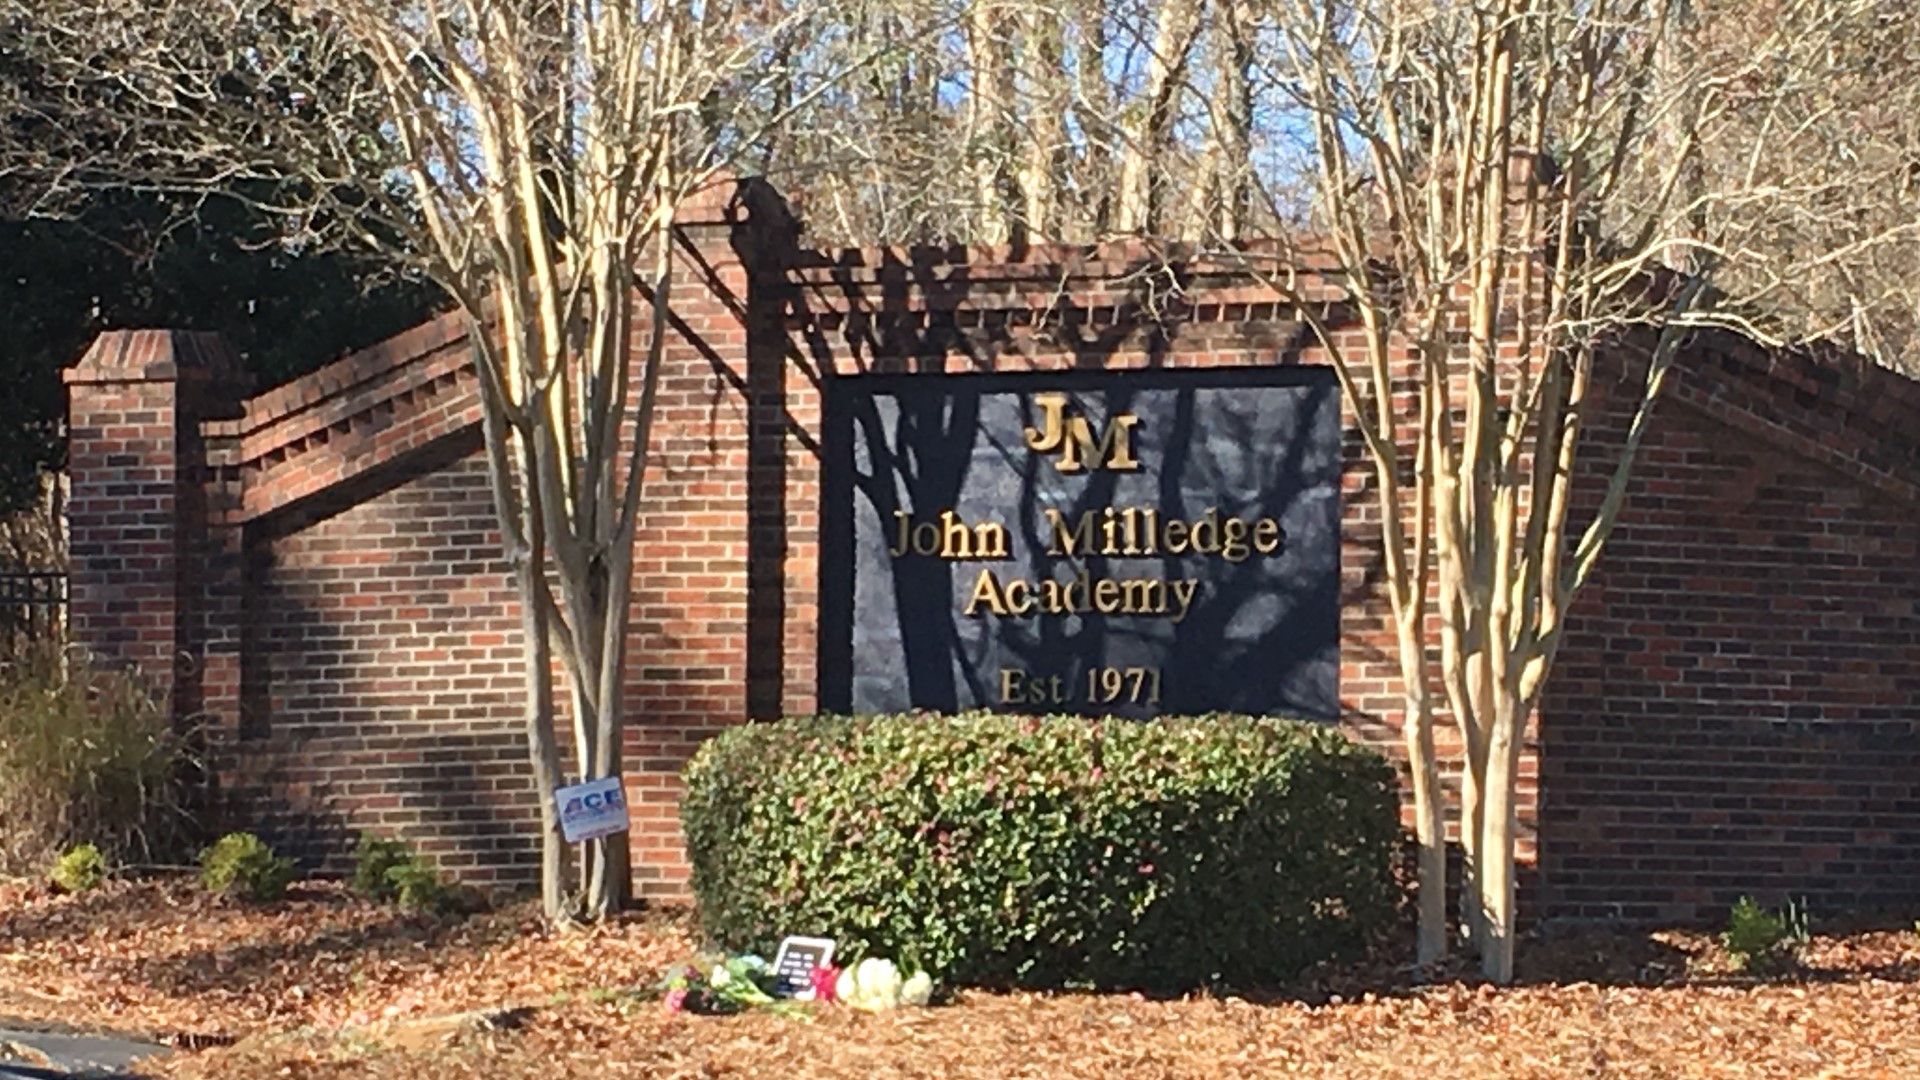 A John Milledge administrator was hit and killed by a car in the school's parking lot Wednesday morning.